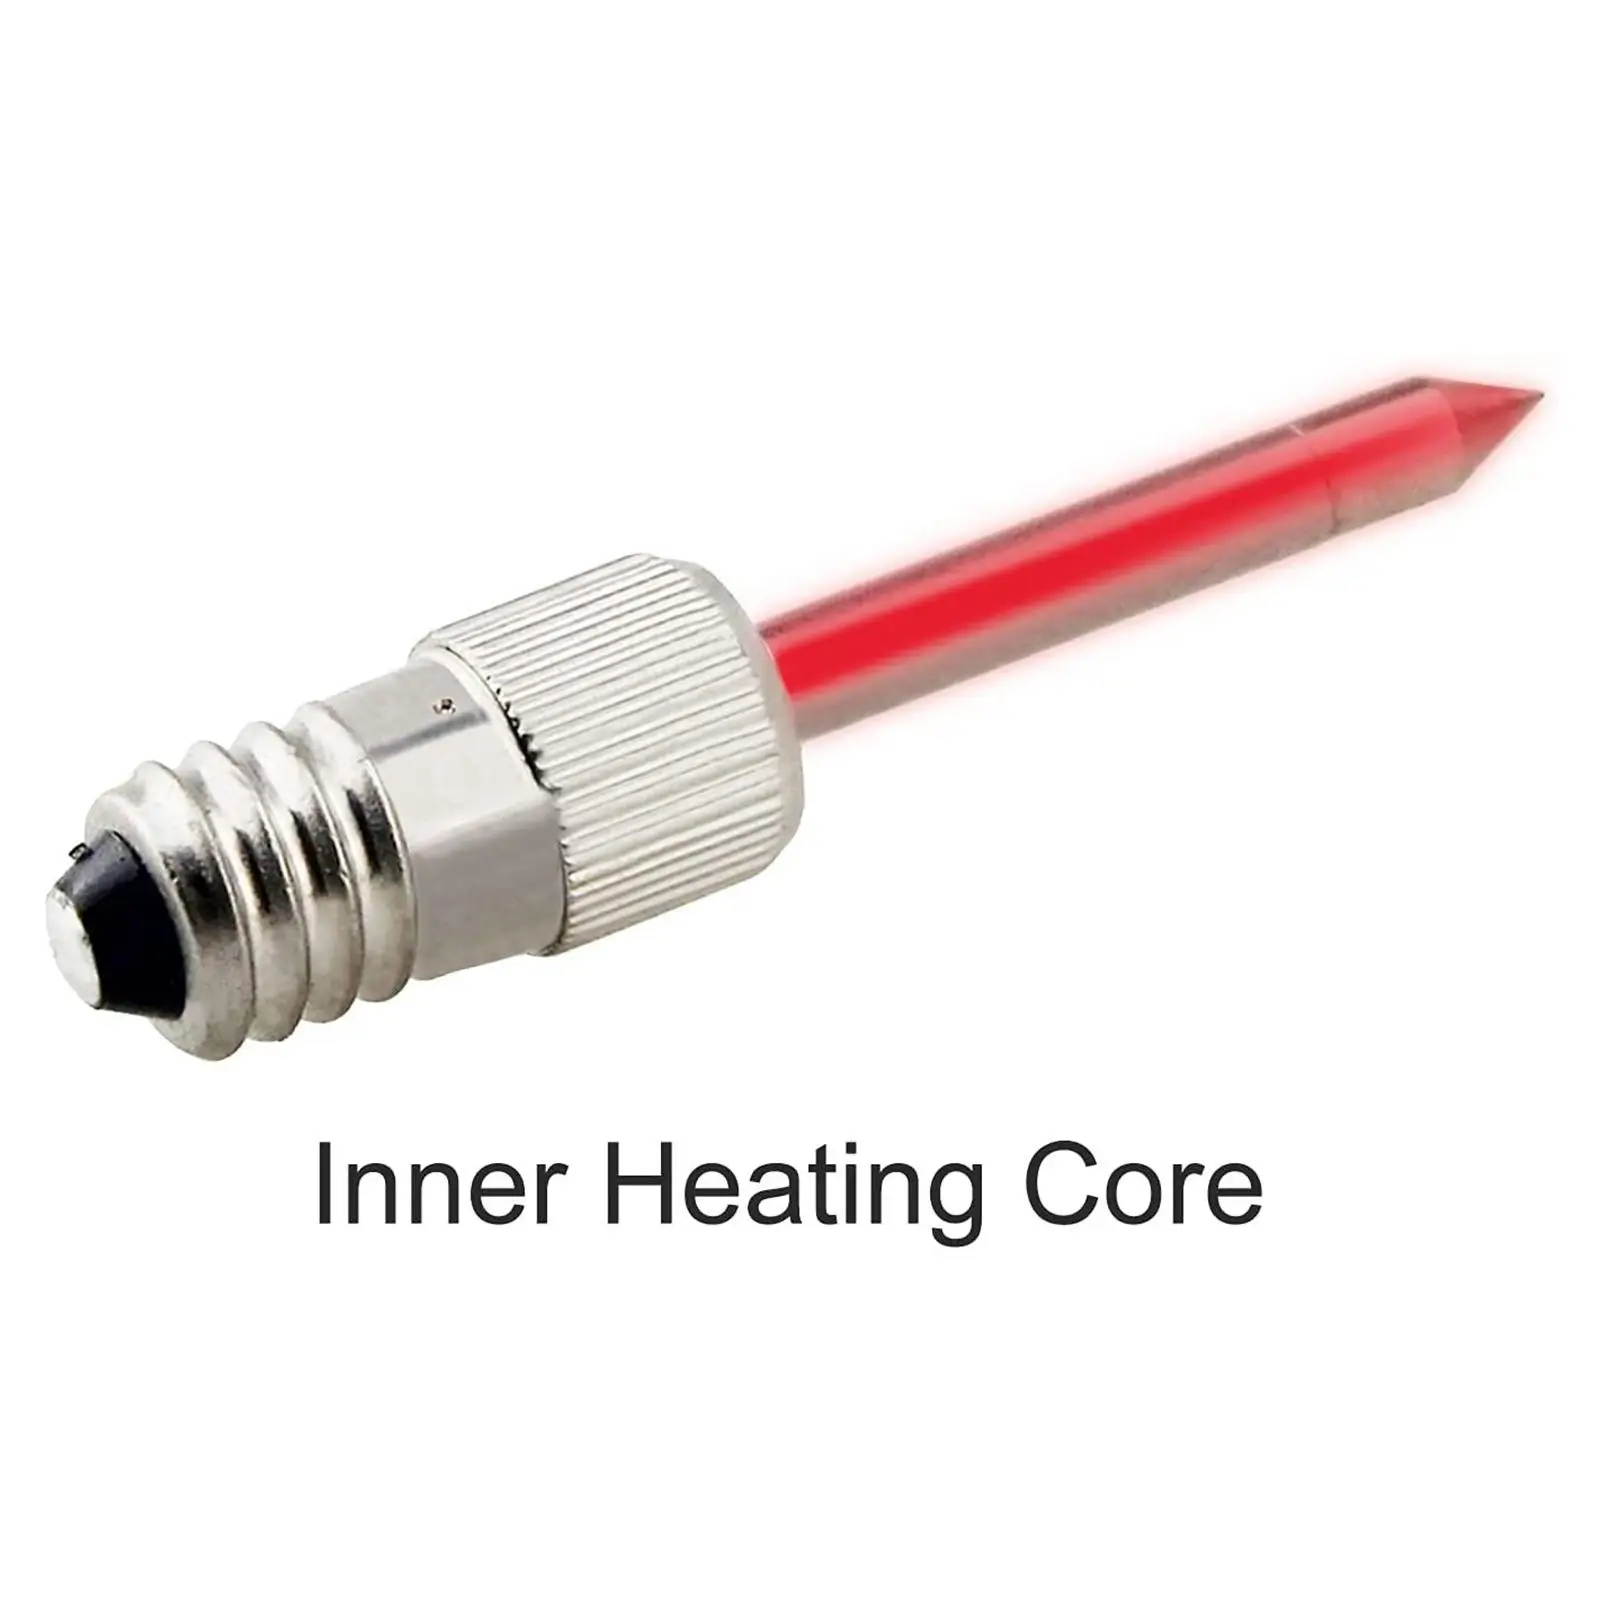 E10 Interface Soldering Iron Tip Removable Replacement Tips for Soldering Station